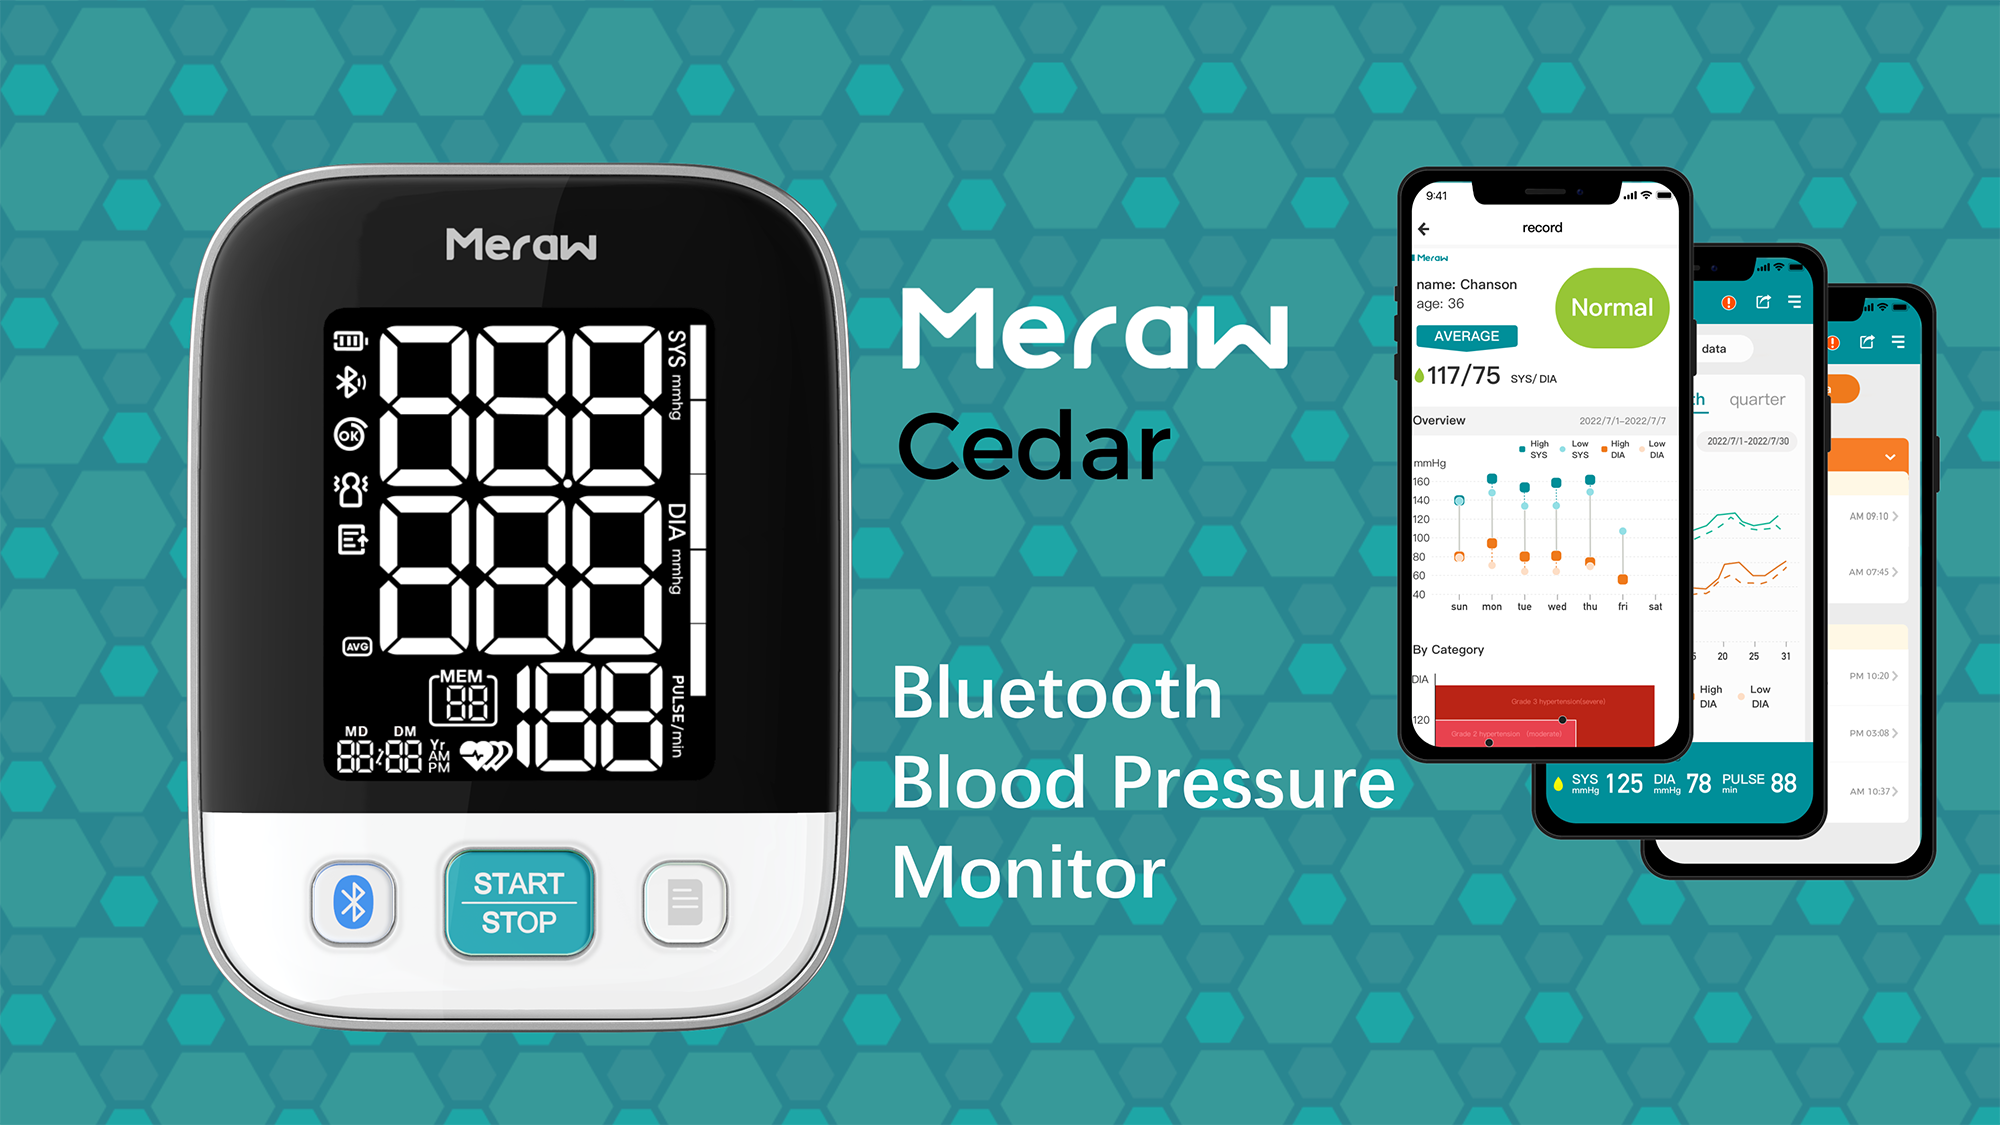 Meraw Bluetooth Blood Pressure Monitor- How to Setup and Demo 